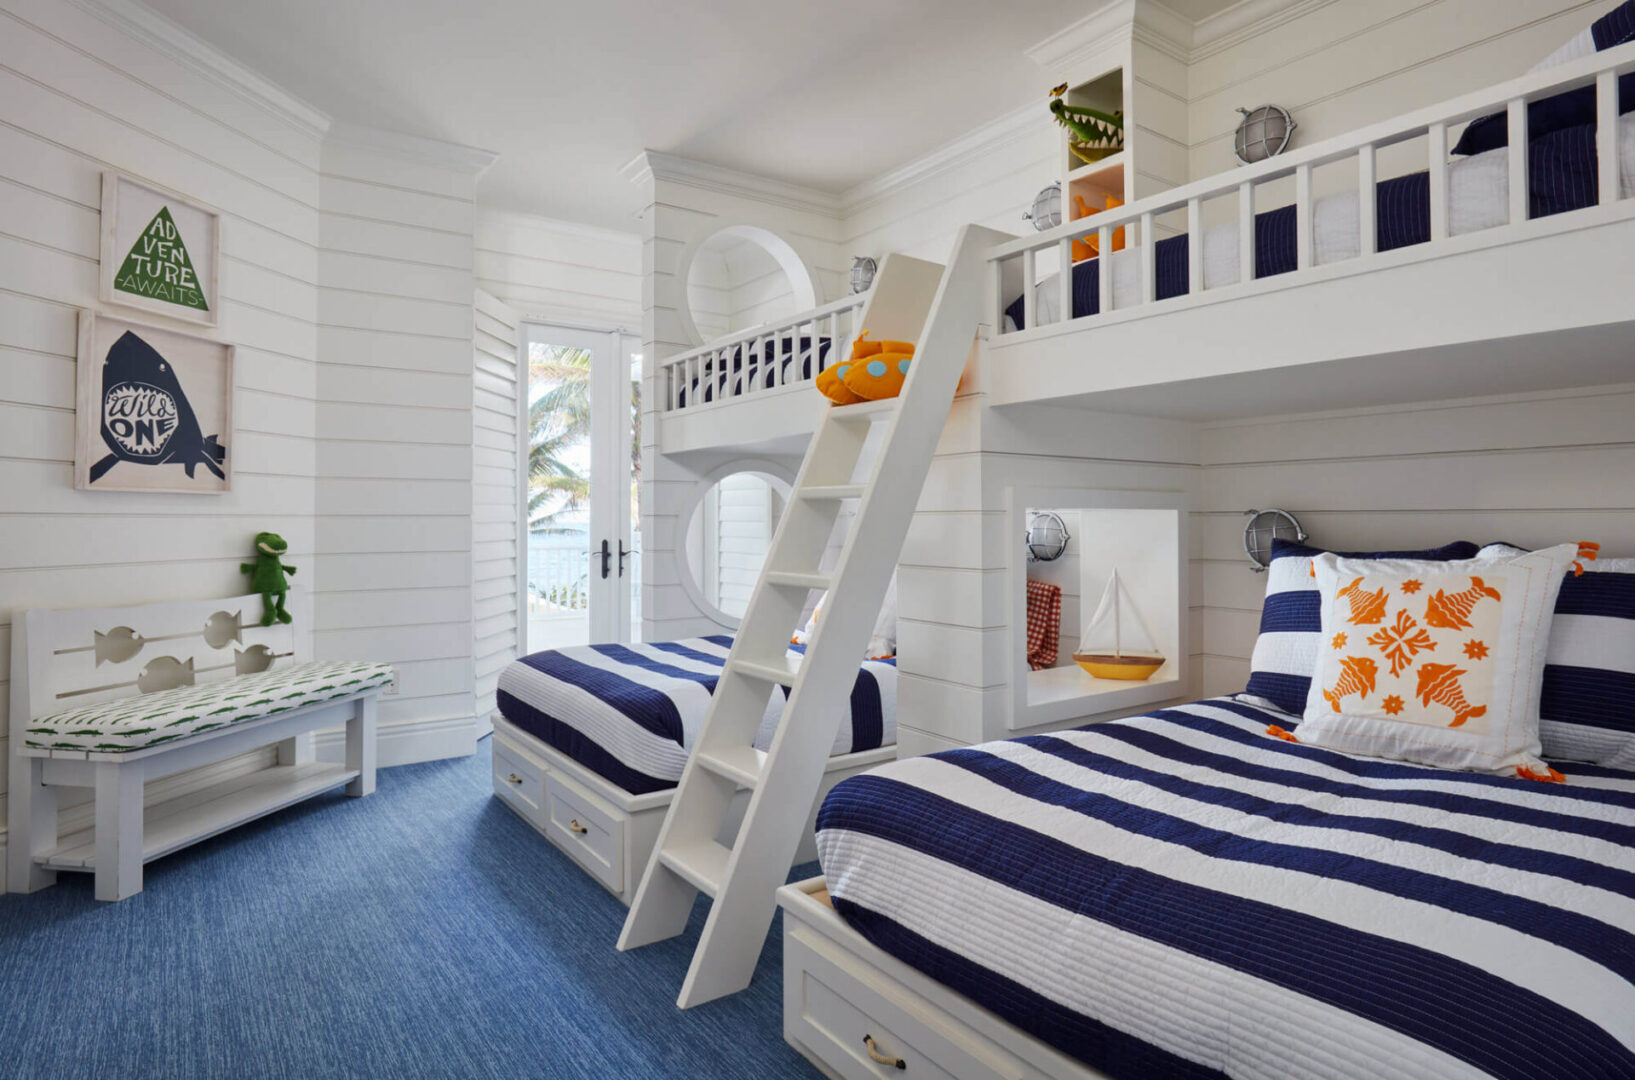 A room with two bunk beds and stairs.